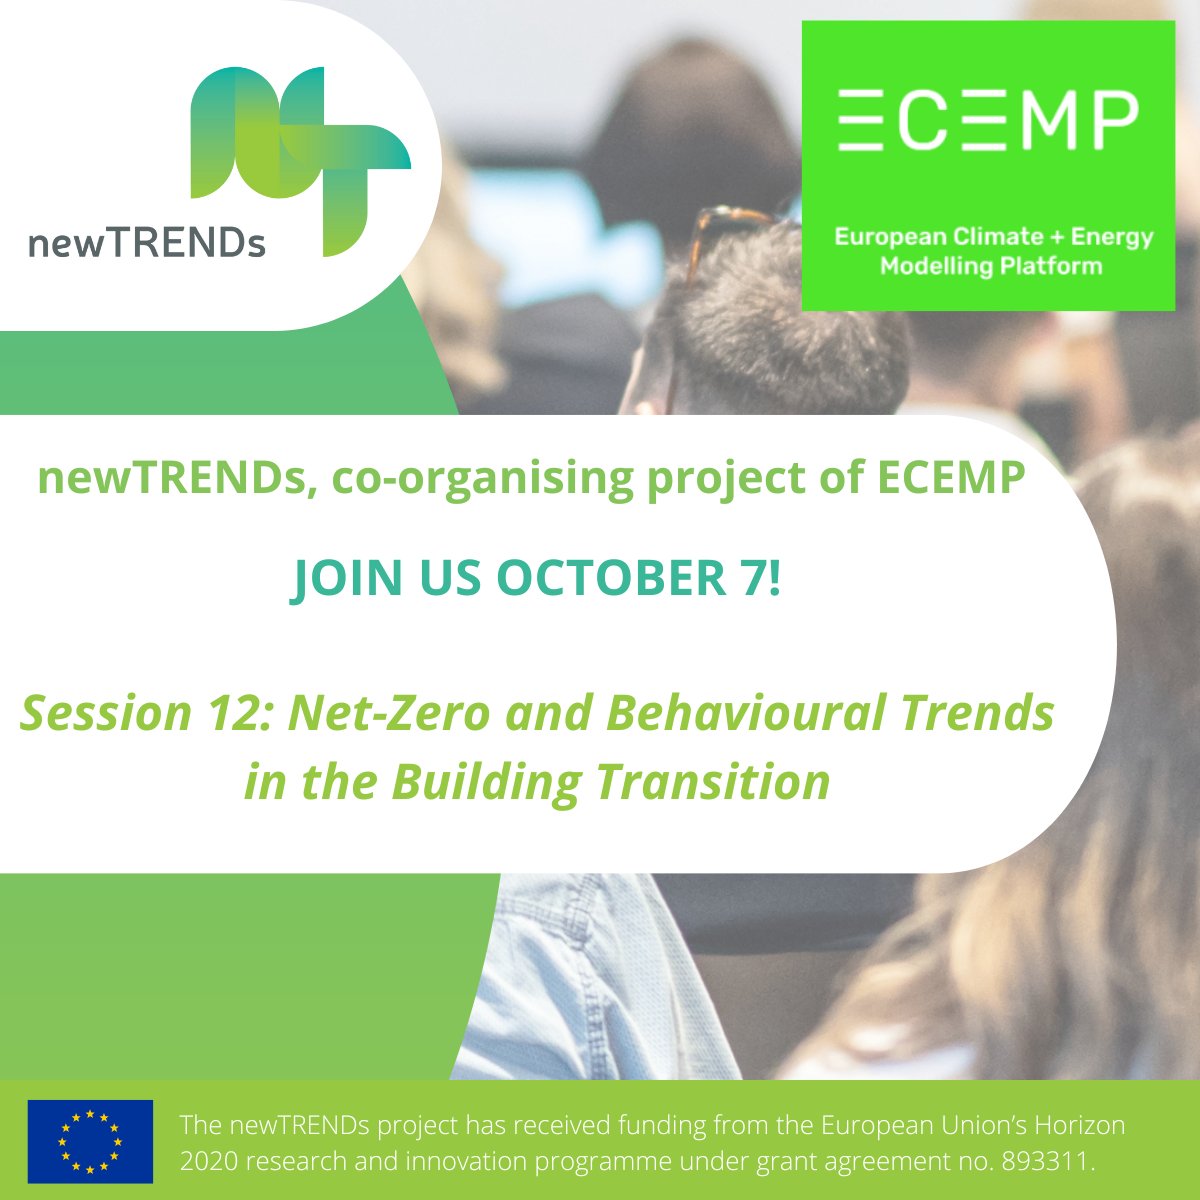 Join us at #ECEMP! Our session Net-Zero and Behavioural Trends in the Building Transition analyses key options to decarbonise the EU buildings sector by 2050, incl. heat pumps, net zero buildings, energy efficiency & hydrogen. A great line up of speakers! newtrends2020.eu/save-the-date-…